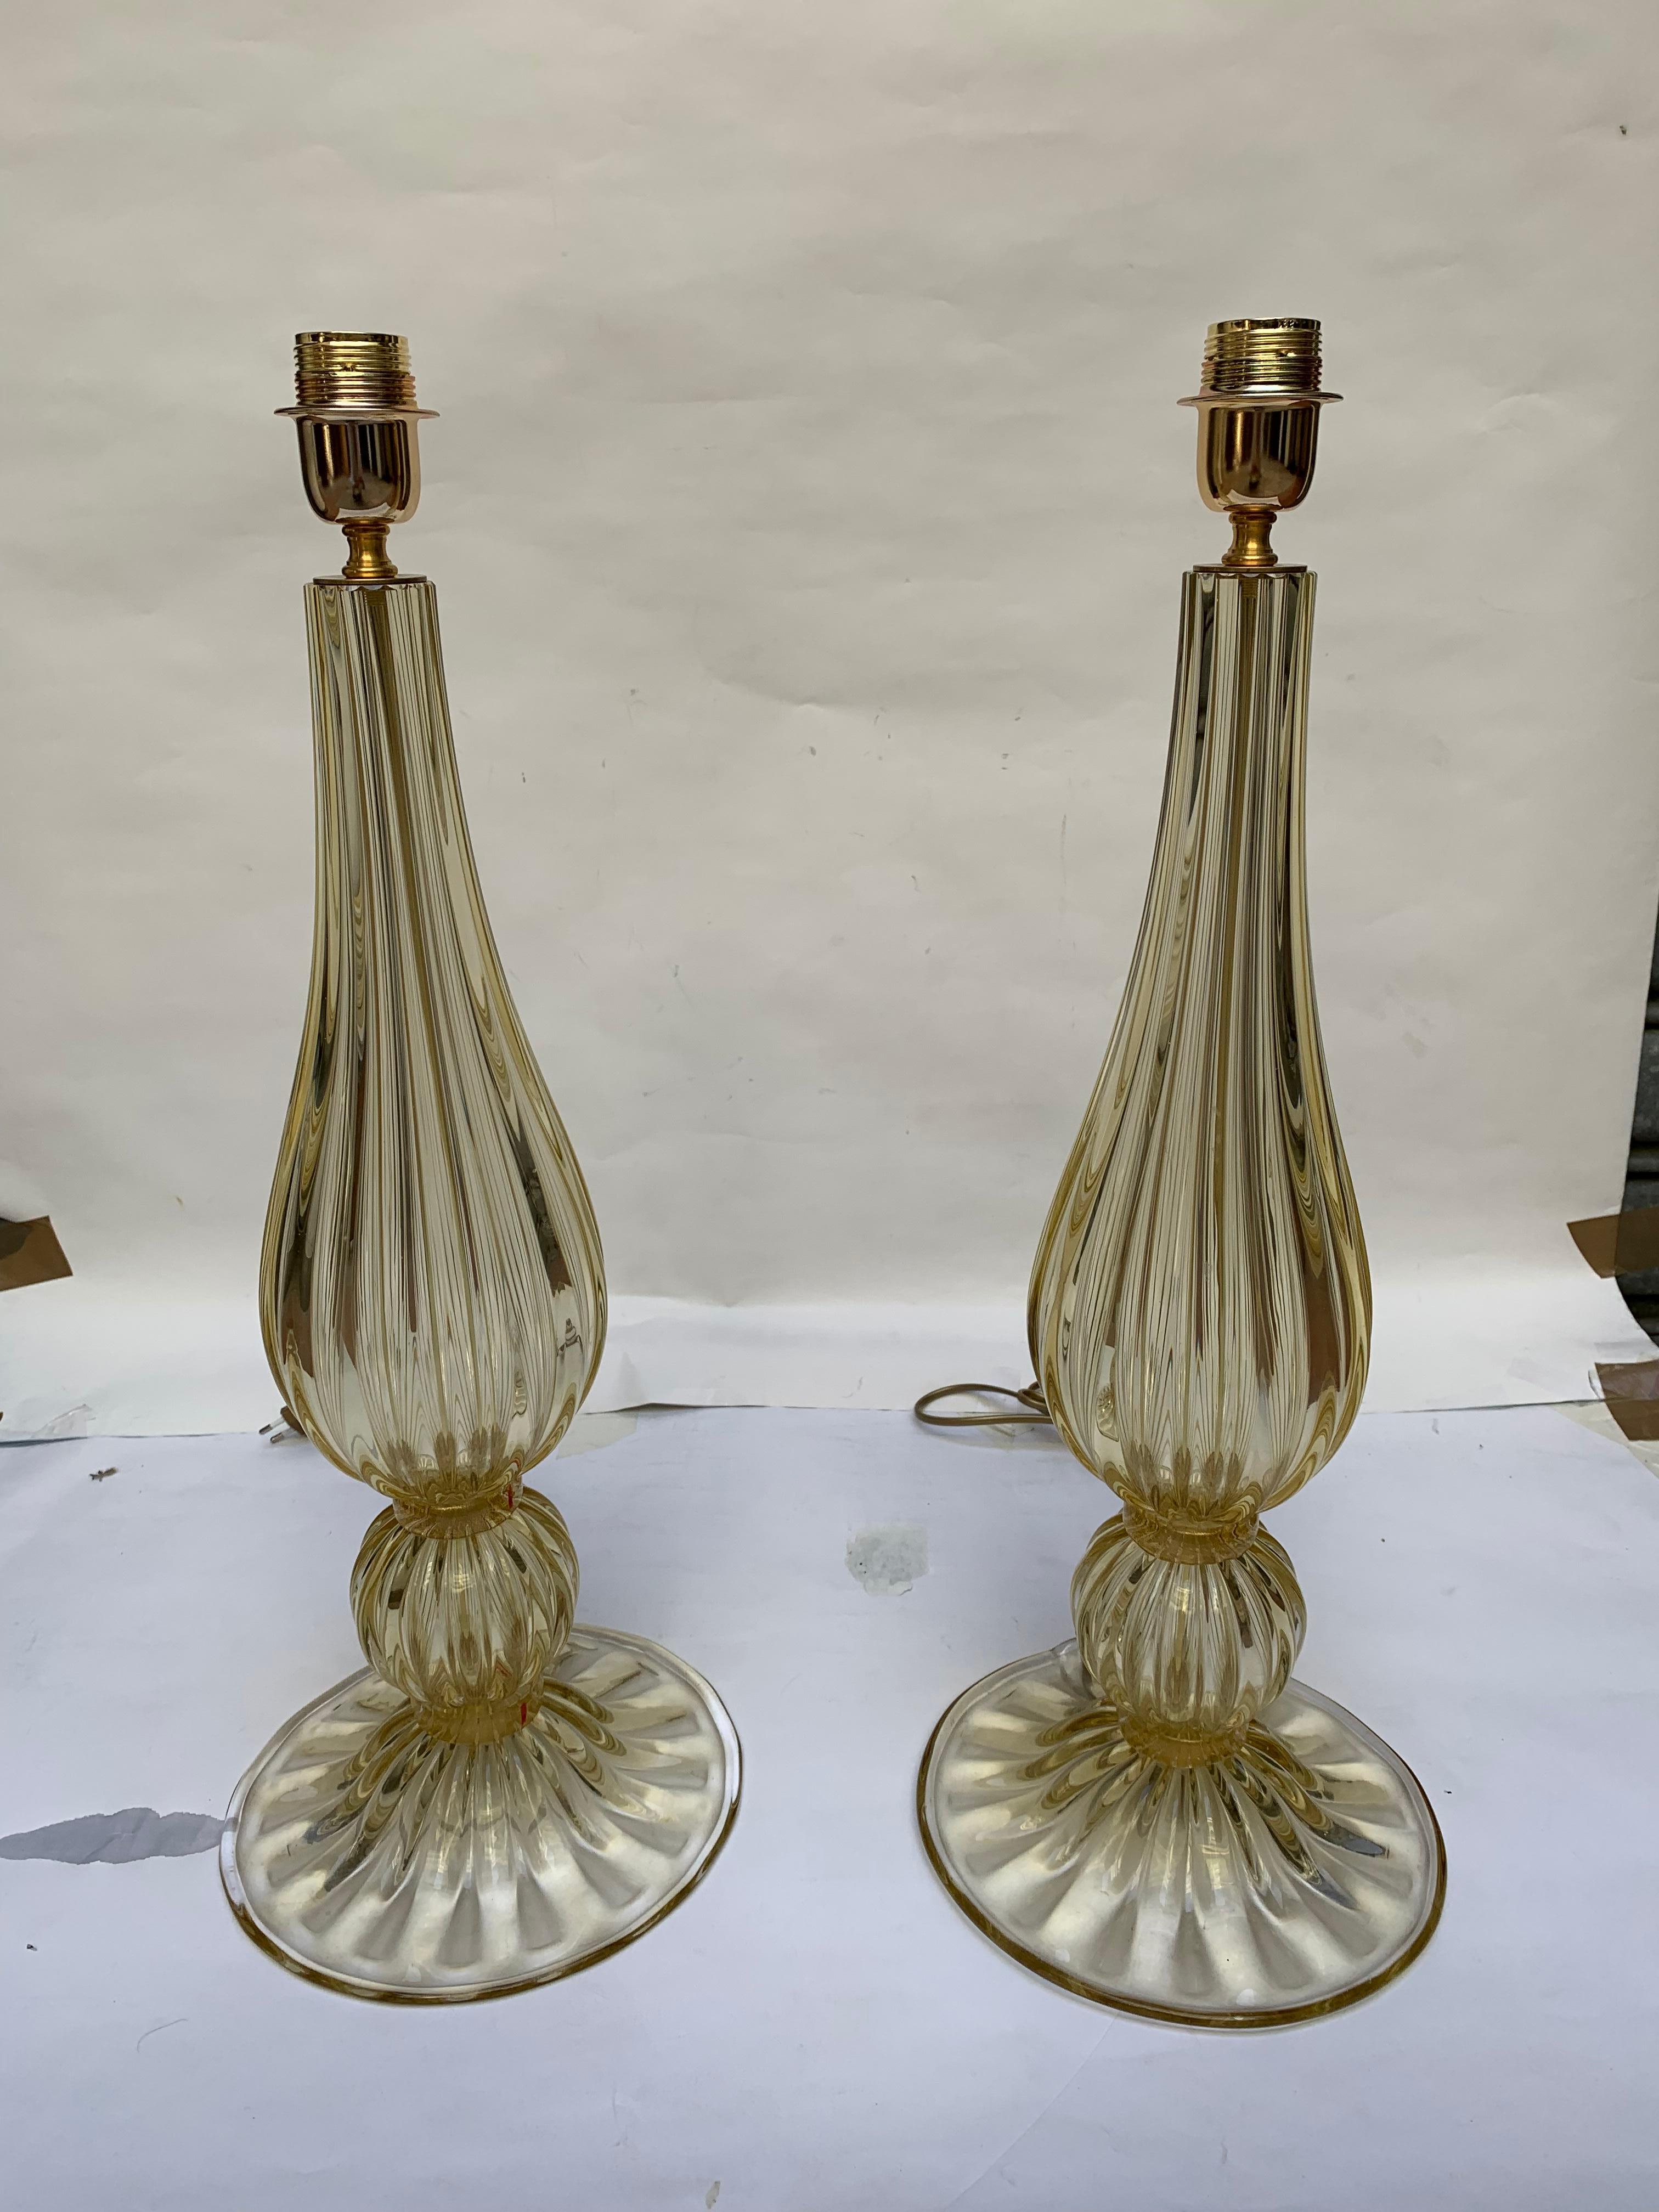 Italian Pair of Table Lamps in Murano Glass Signed “Toso”